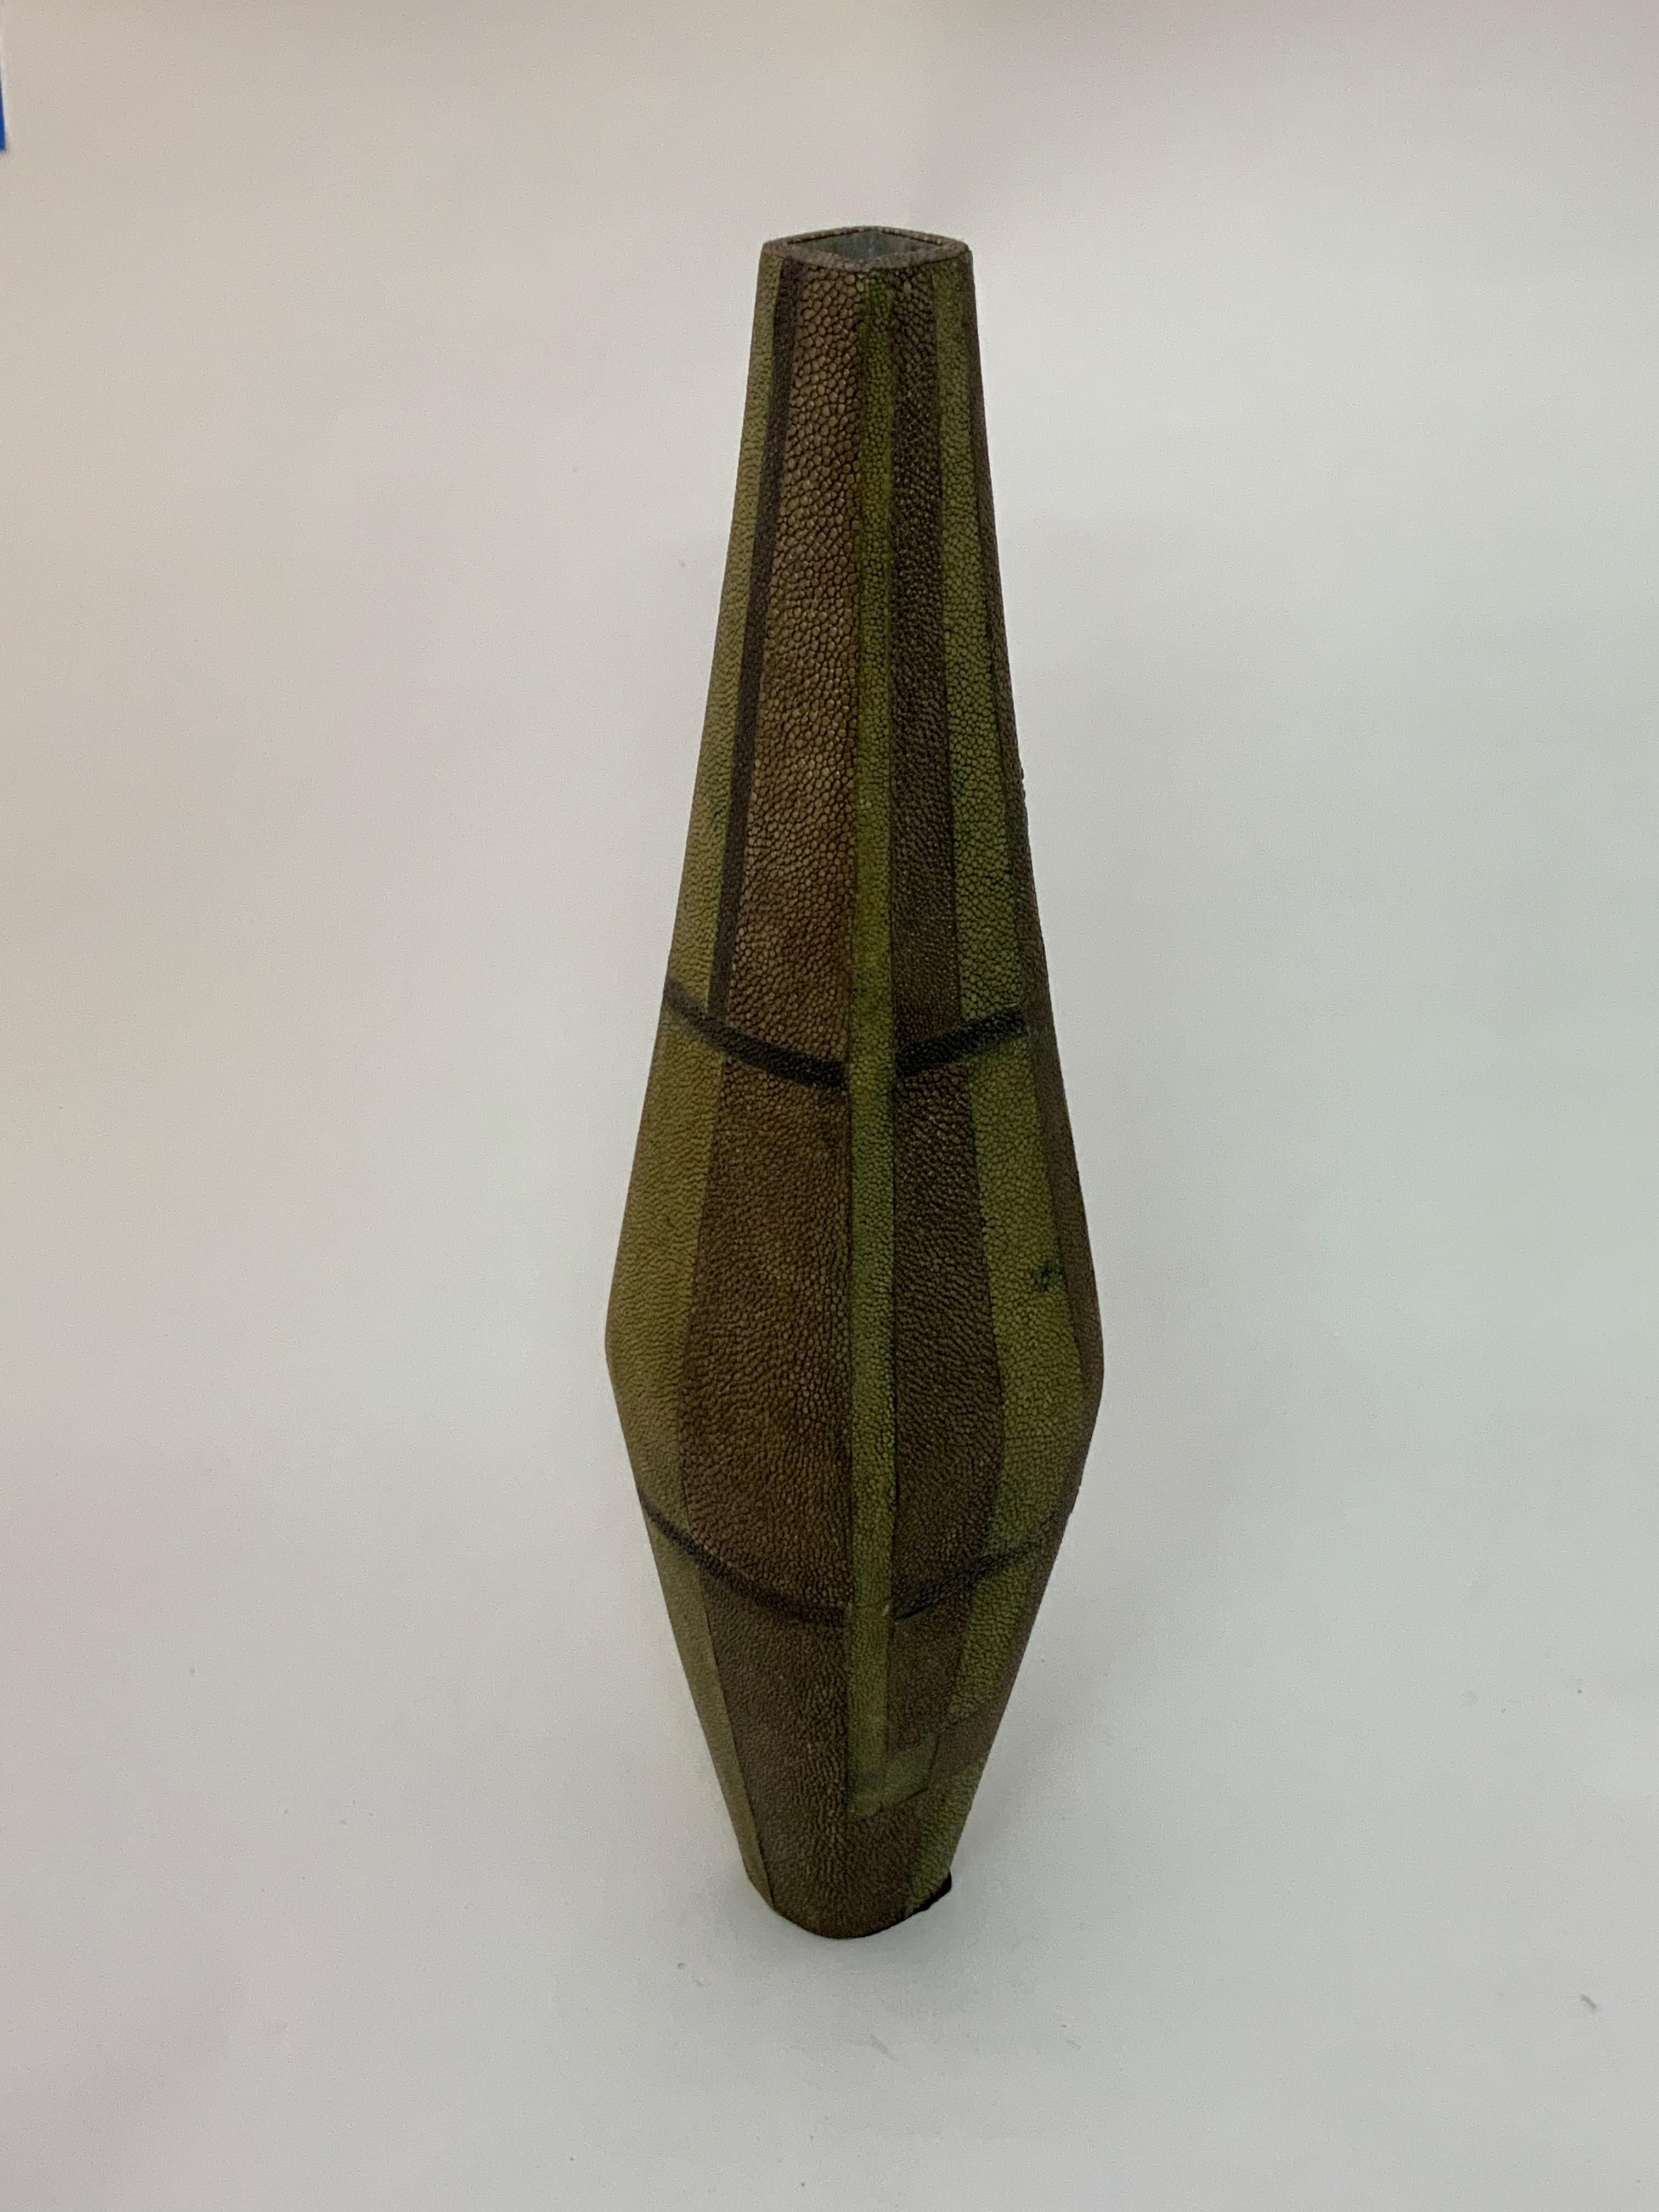 Tall and elegant shagreen clad vase by Ria and Yiouri Augousti. Fully signed on bottom. Geometric pattern of olive green, aubergine and light brown.

Measures: 16.25